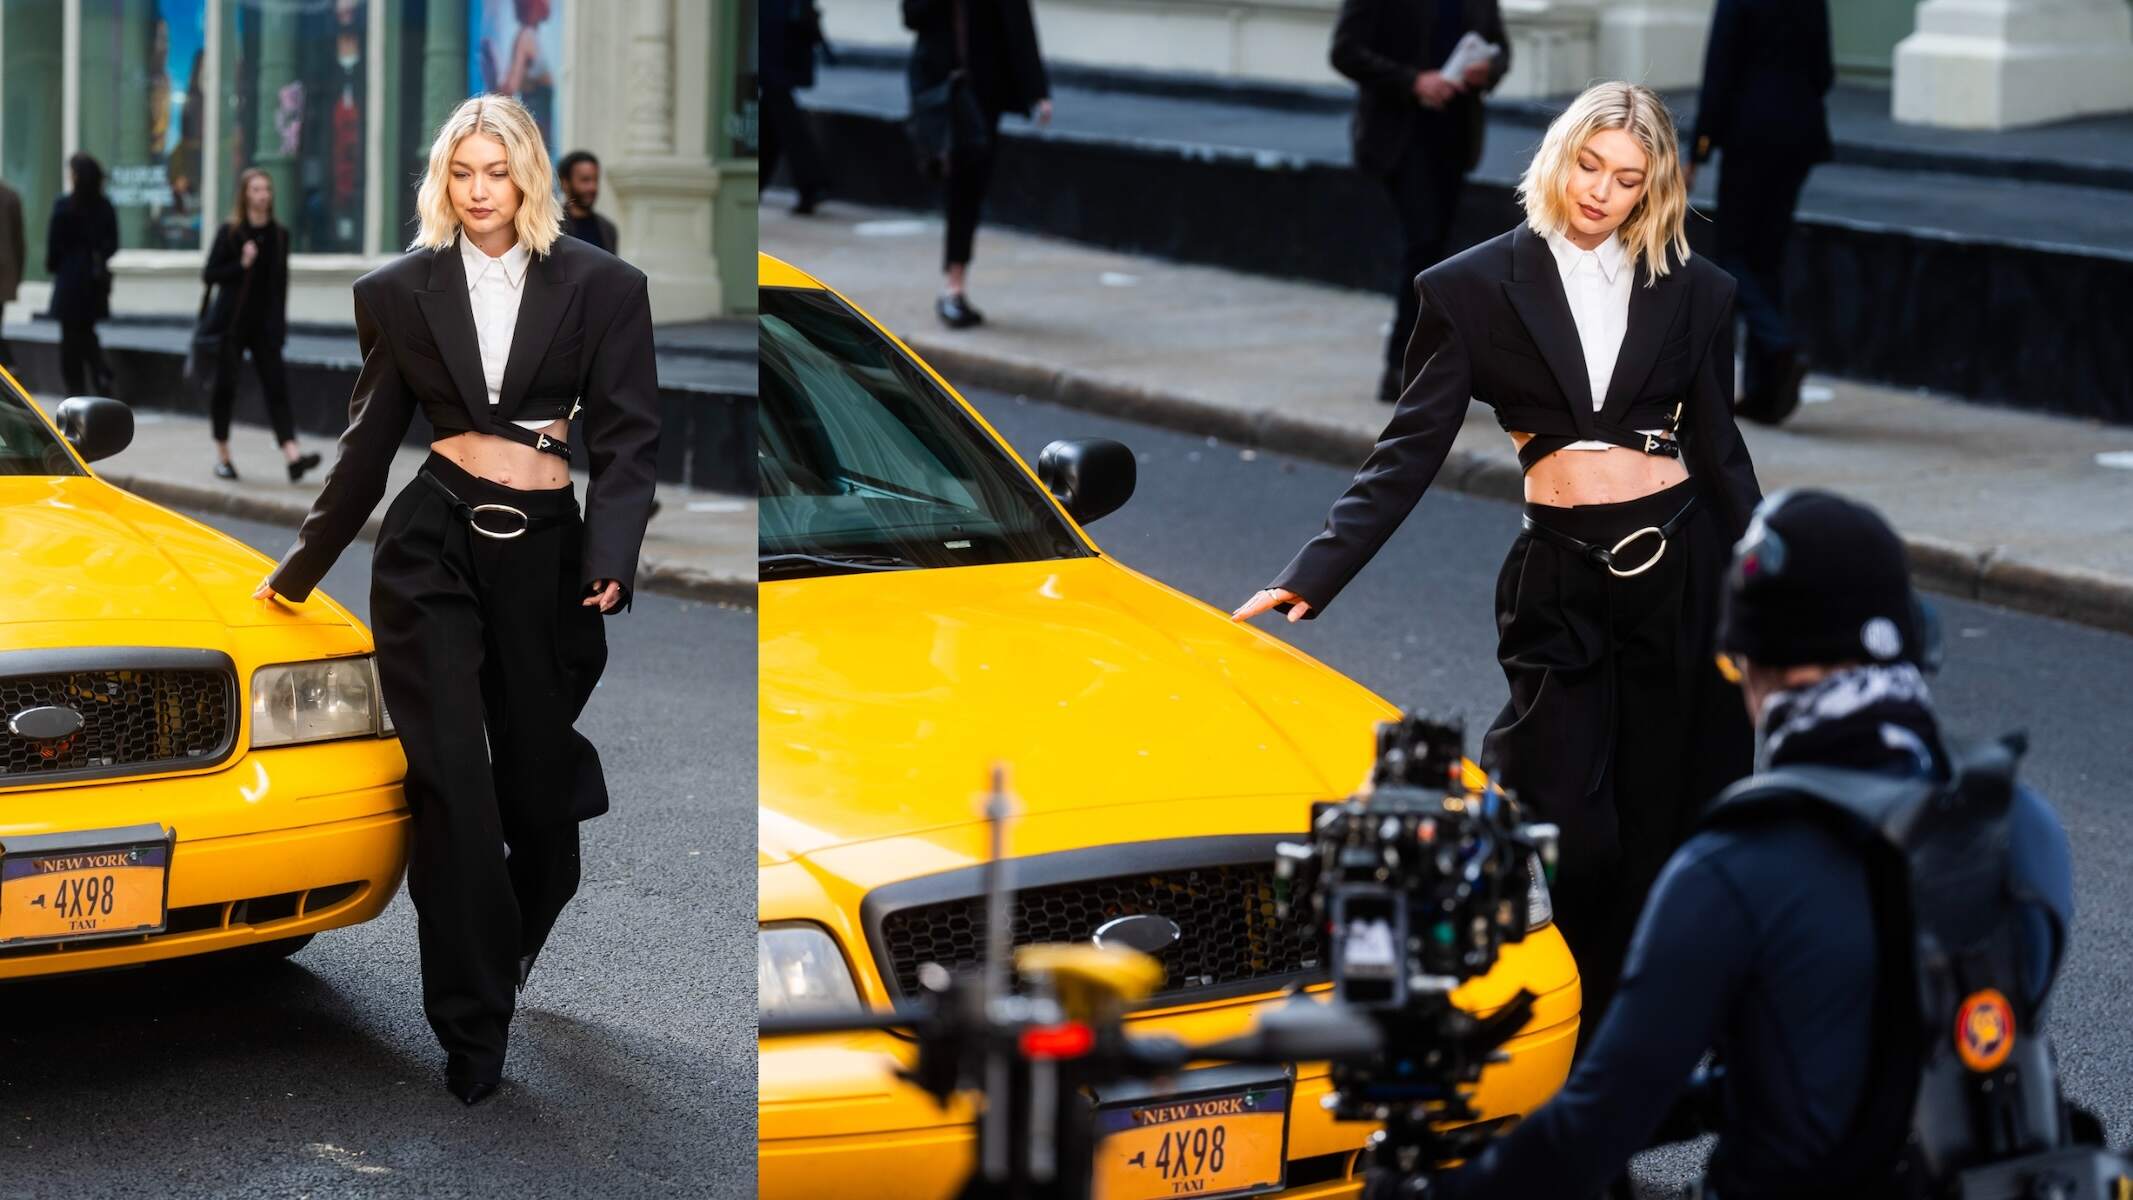 Model Gigi Hadid wears a black jacket and pants and walks by a taxi while filming a video for Maybelline on a NYC street